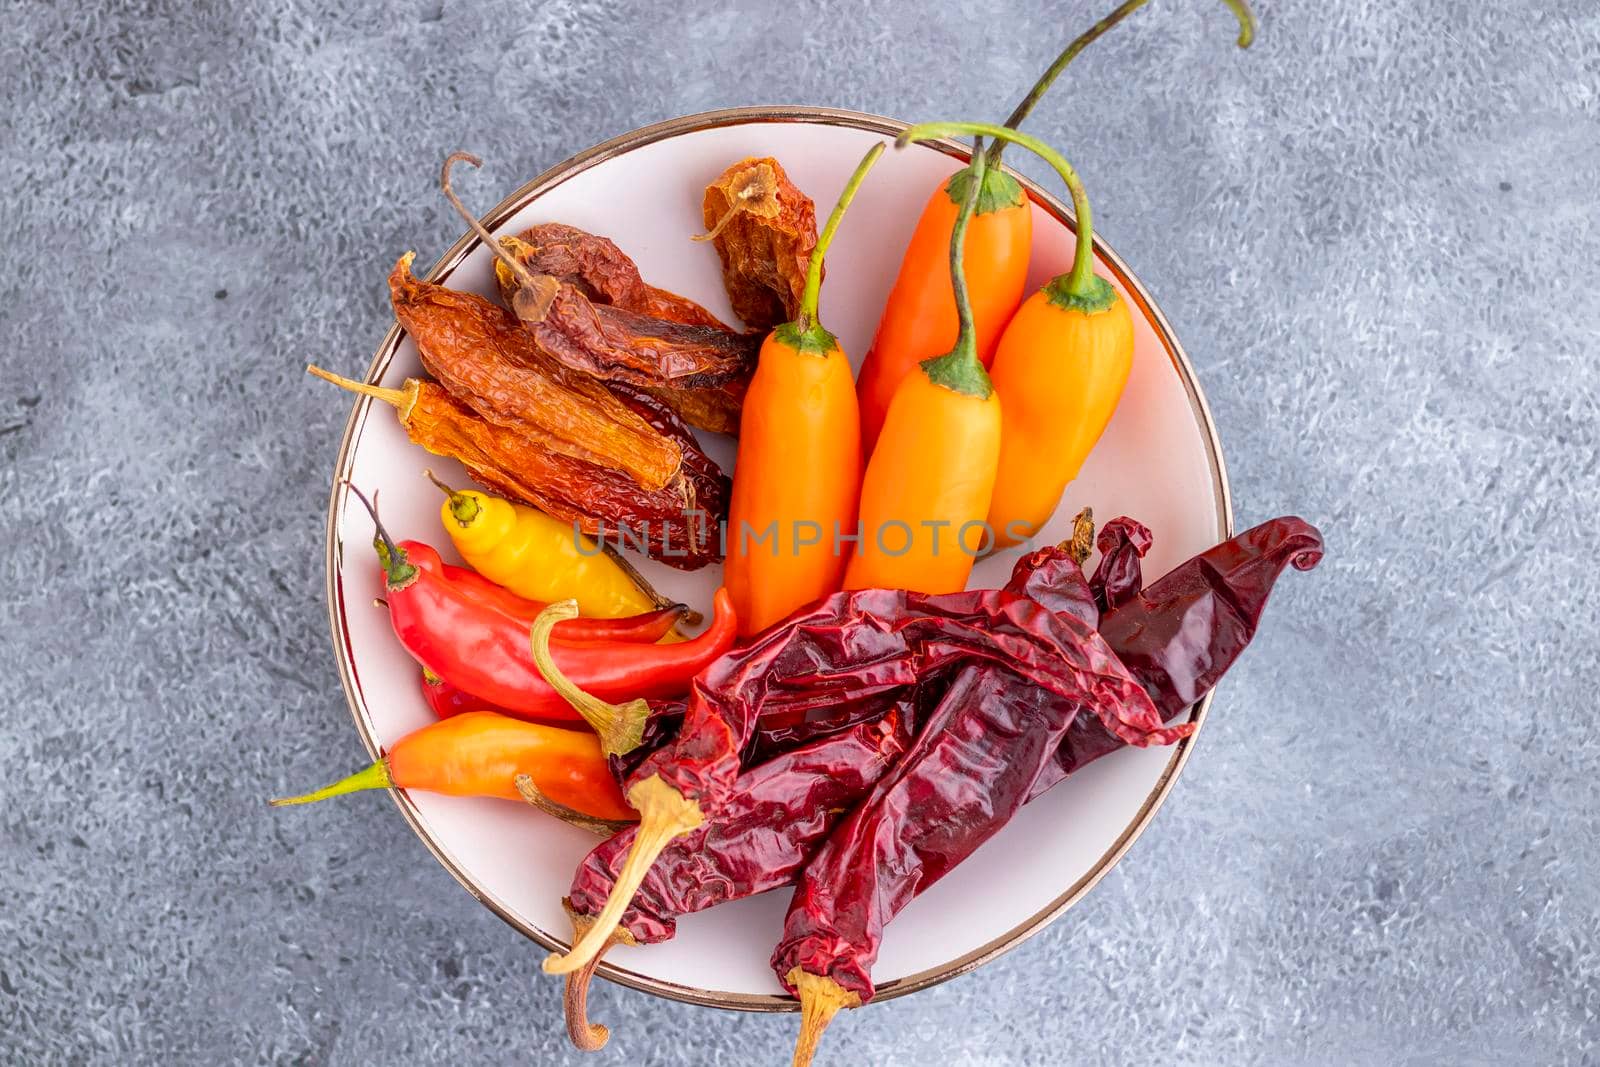 View of several Peruvian peppers, such as yellow pepper, limo pepper and paprika by eagg13